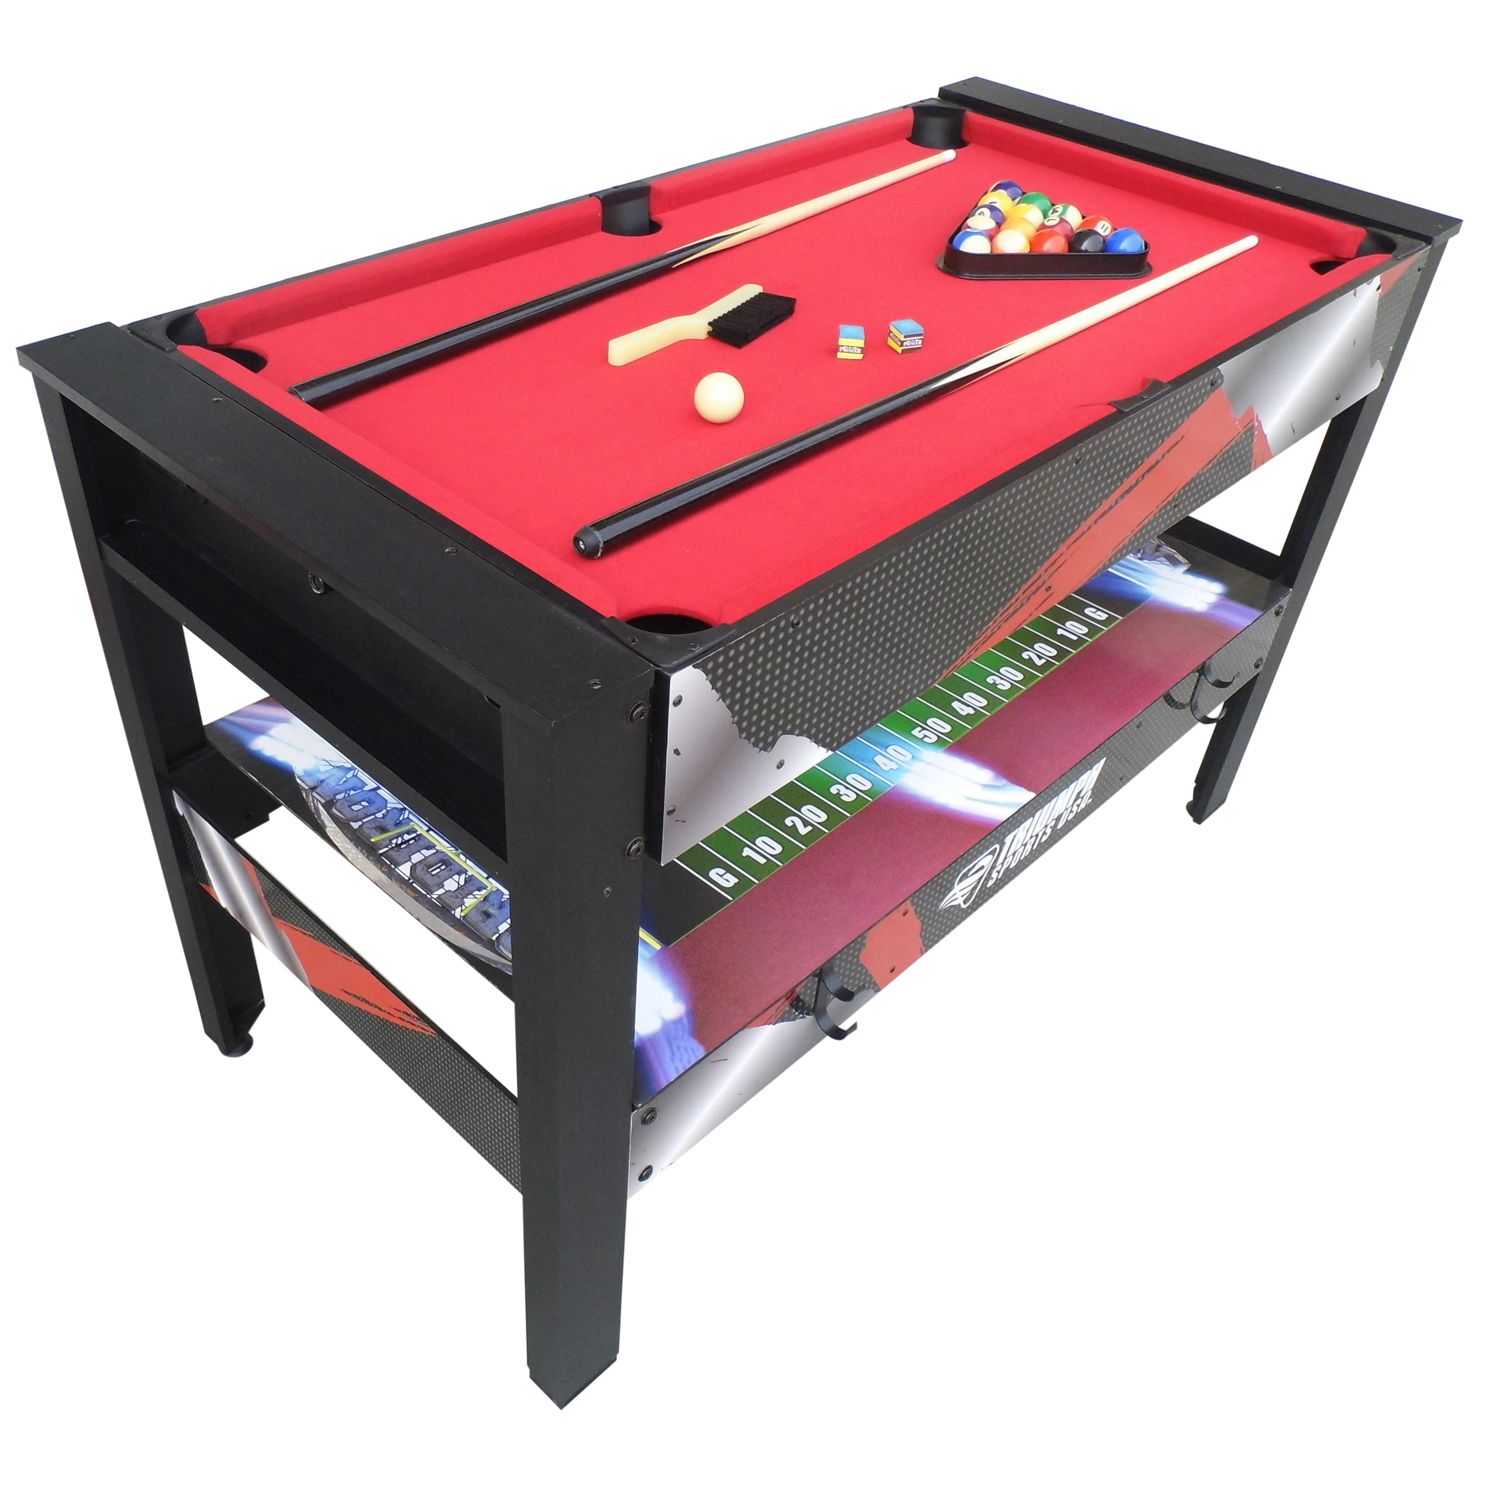 Soozier 55'' Portable Folding Billiards Table Game Pool Table For Kids  Adults With Cues, Ball, Rack, Brush, Chalk : Target